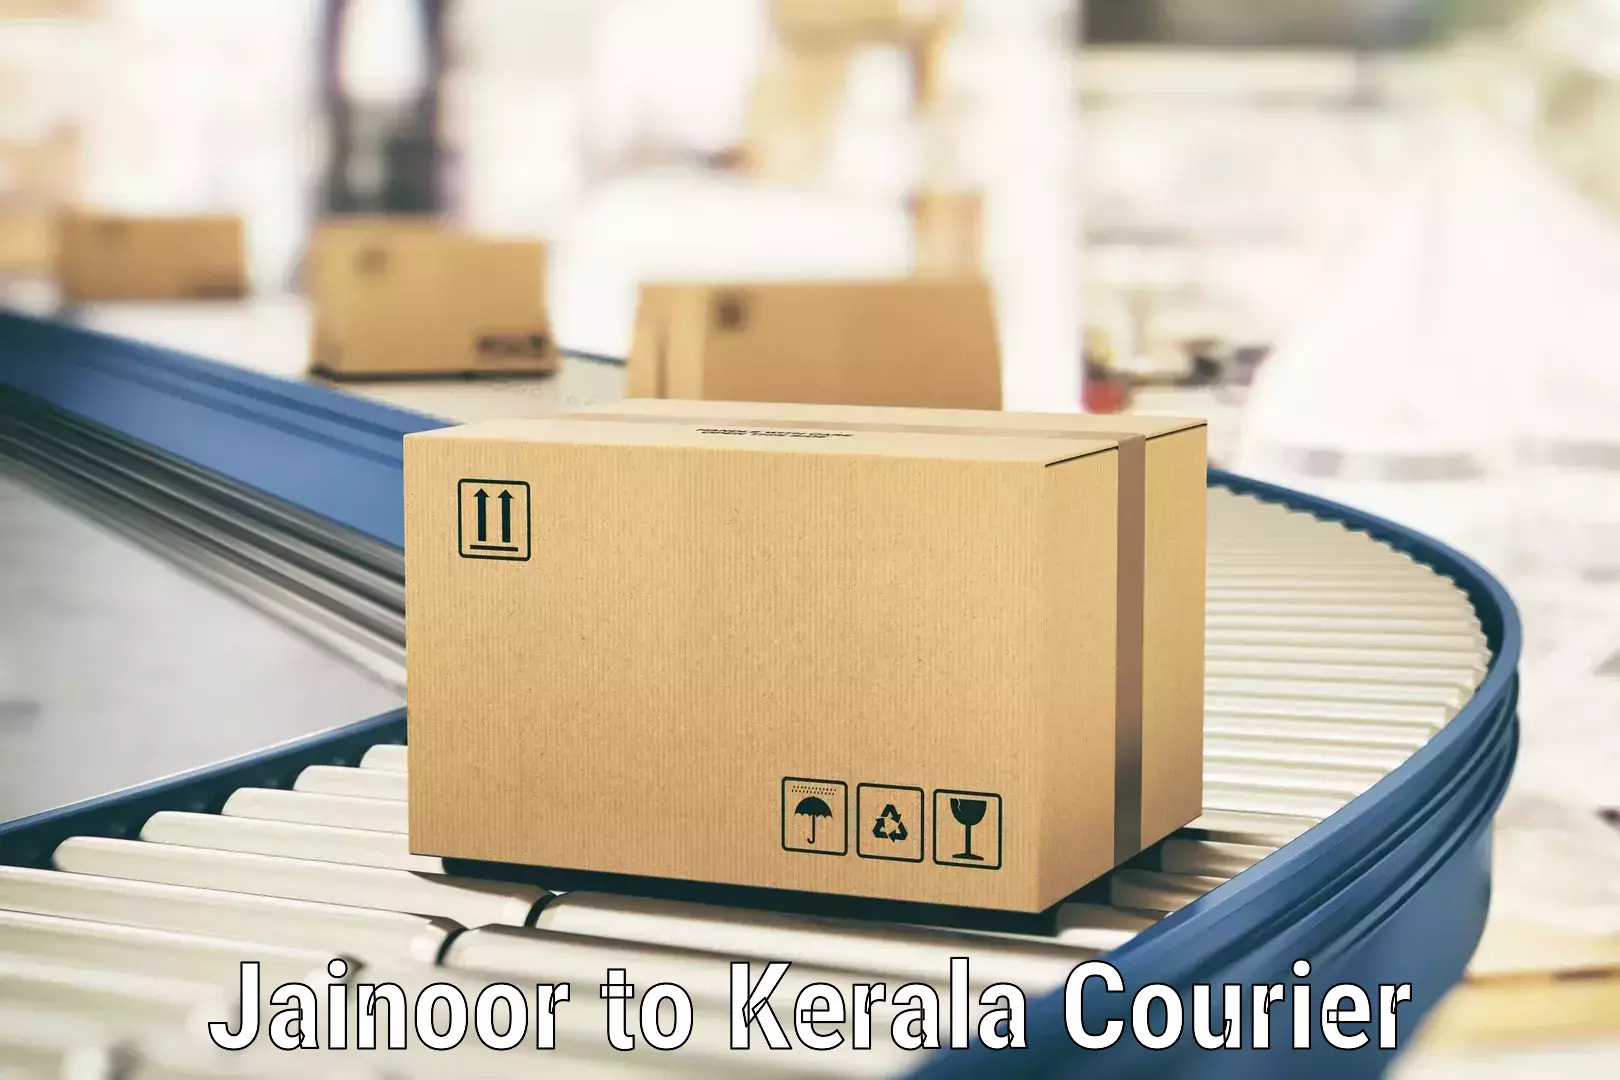 Business delivery service Jainoor to Chungathara